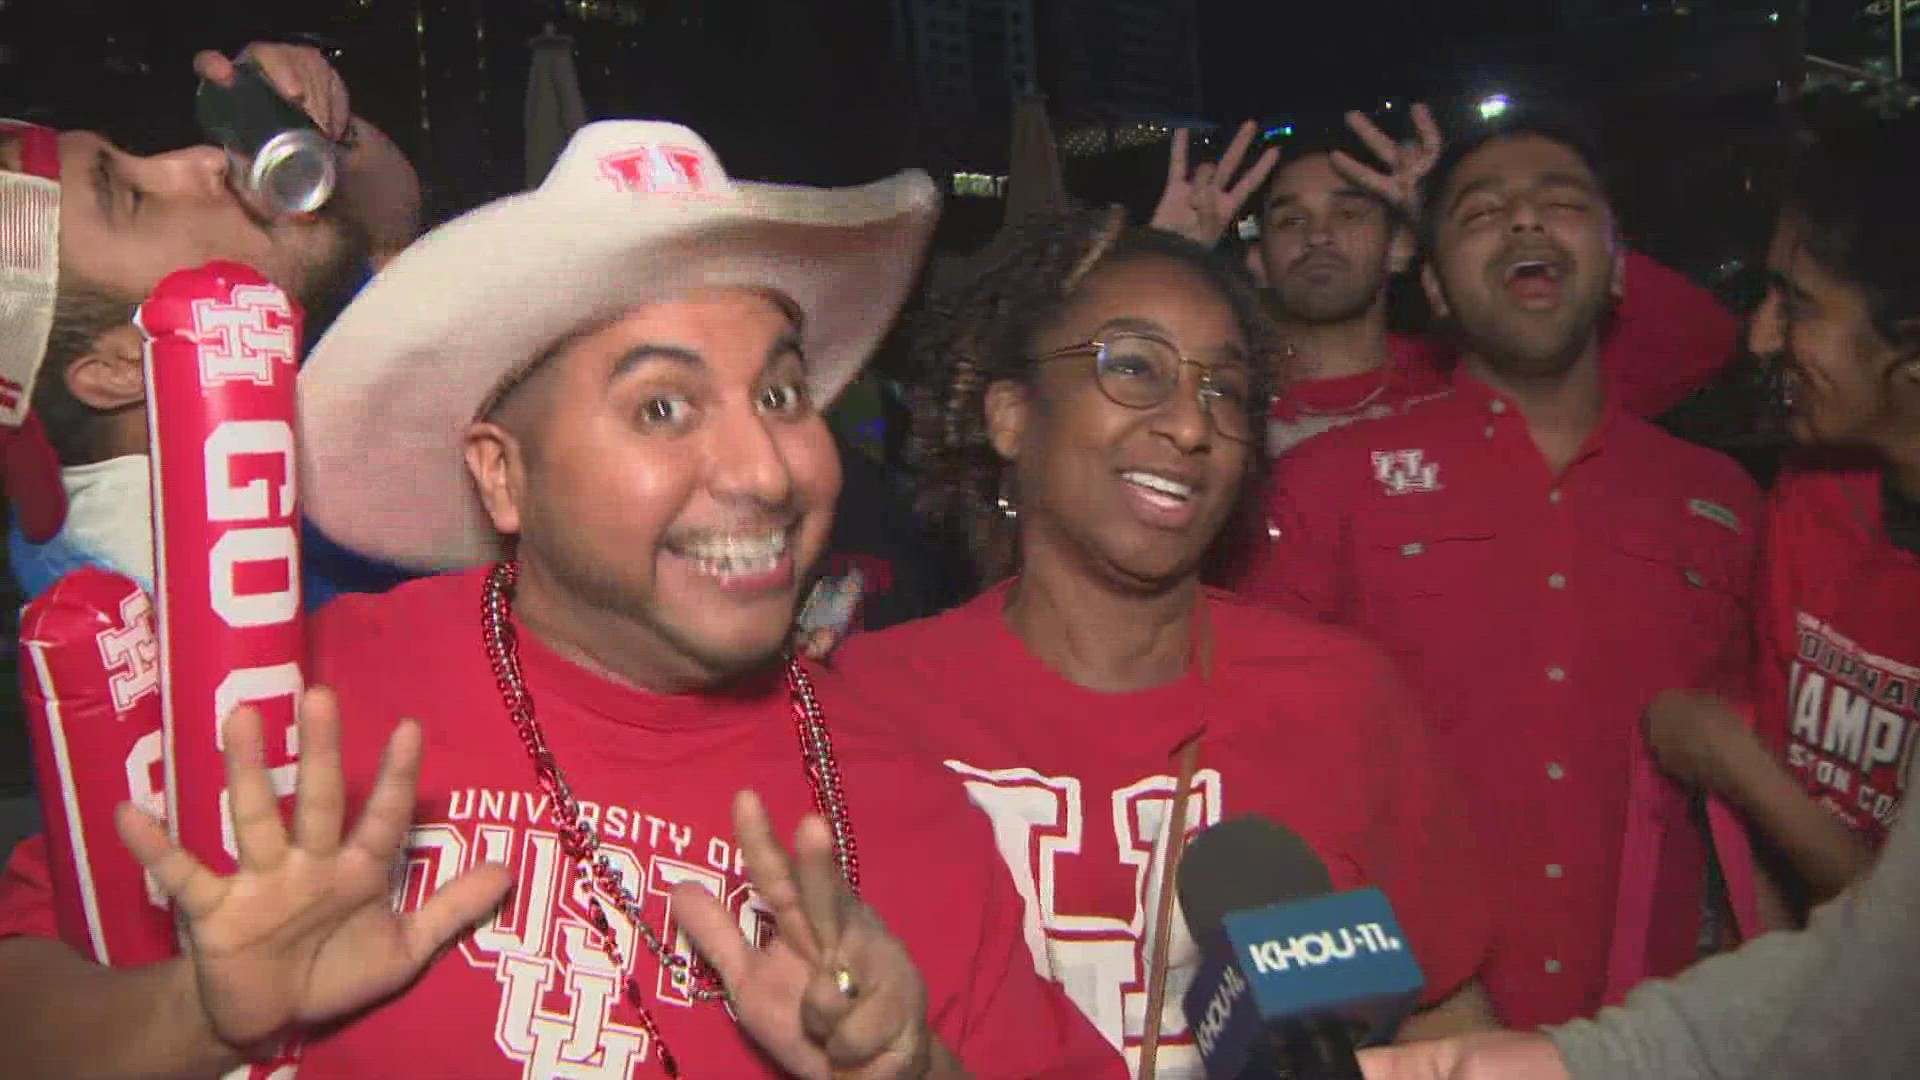 Fans flocked to downtown to watch Houston knock off top-seeded Arizona on Thursday night.